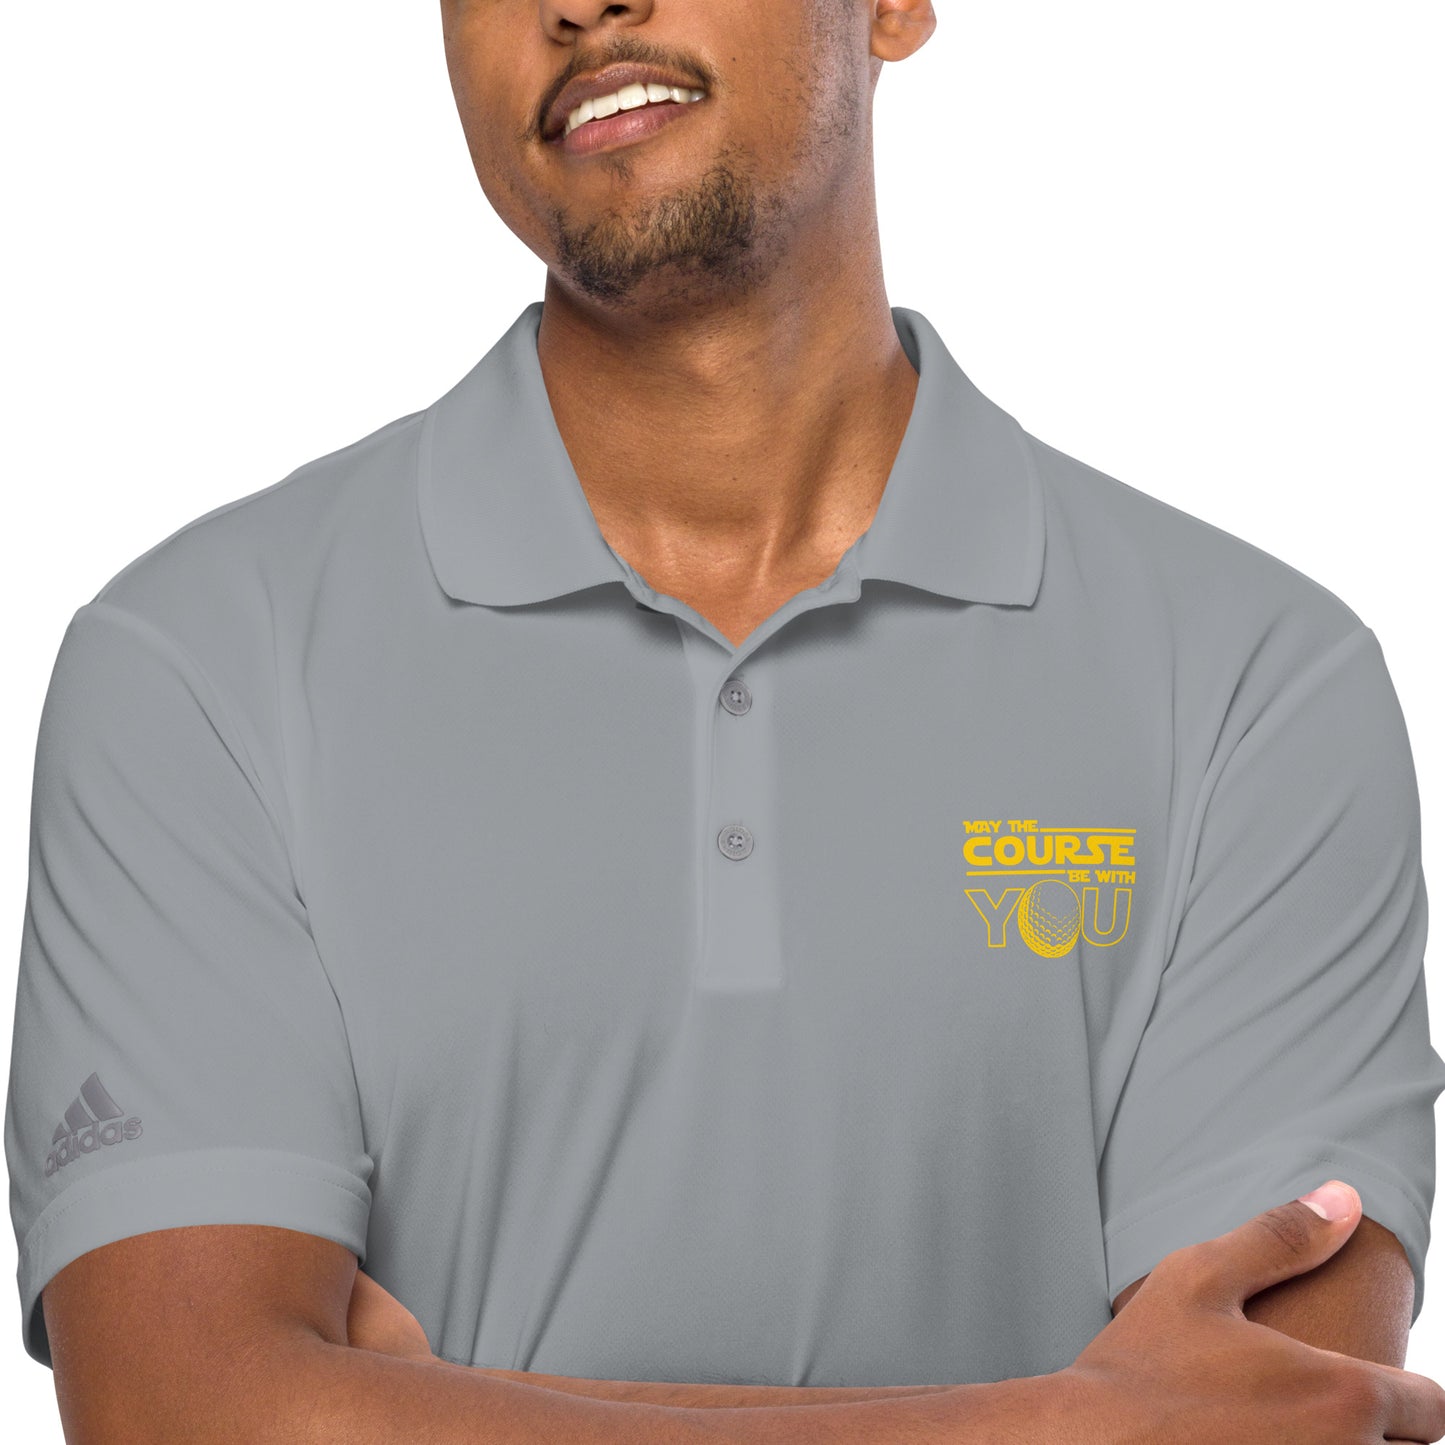 Adidas 'May The Course Be With You' Performance Polo Shirt (Yellow Lettering)